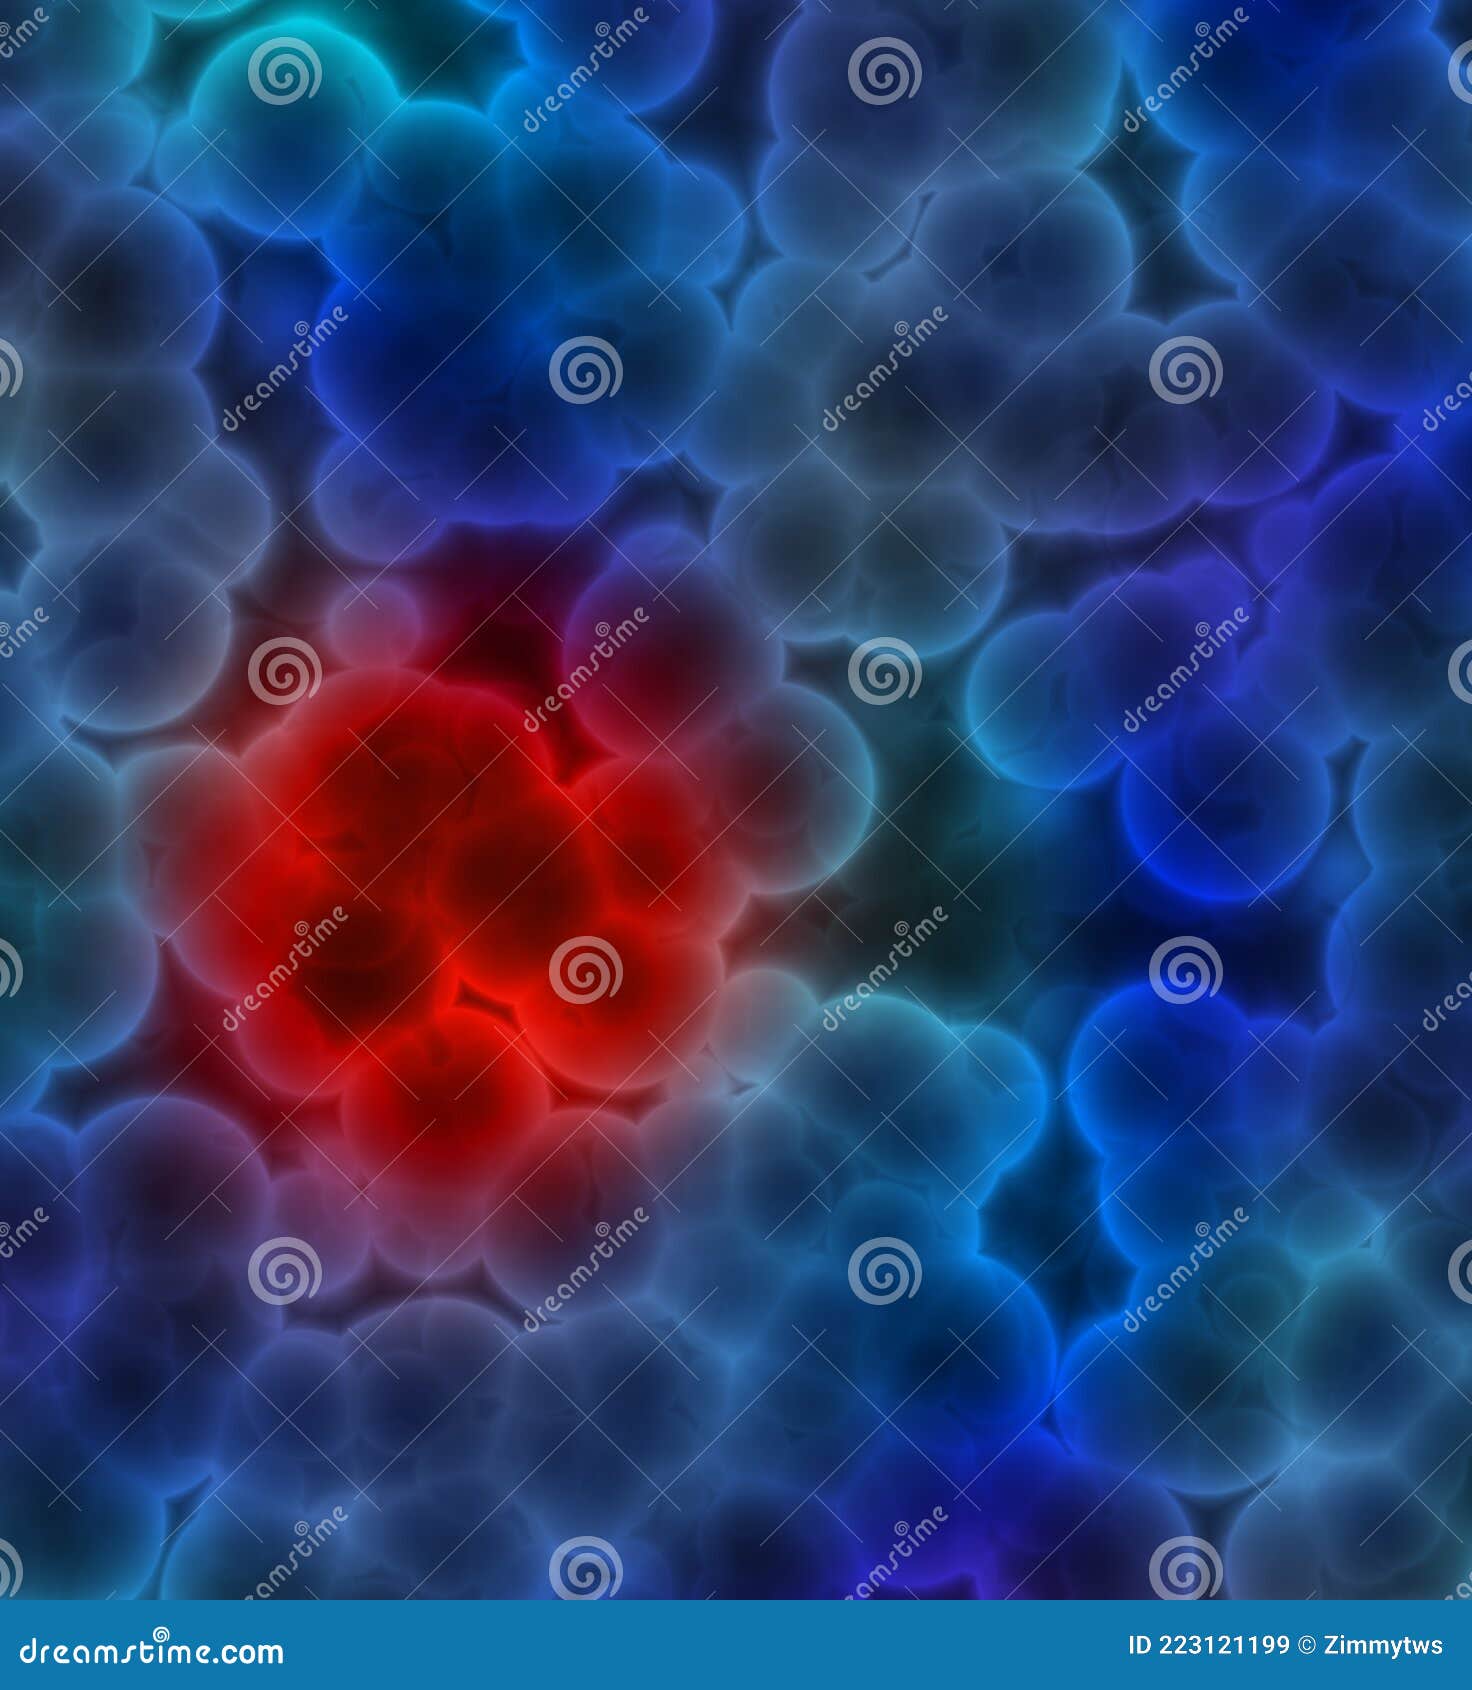  of blue cells with red cluster indicating a cancer tumor or infection